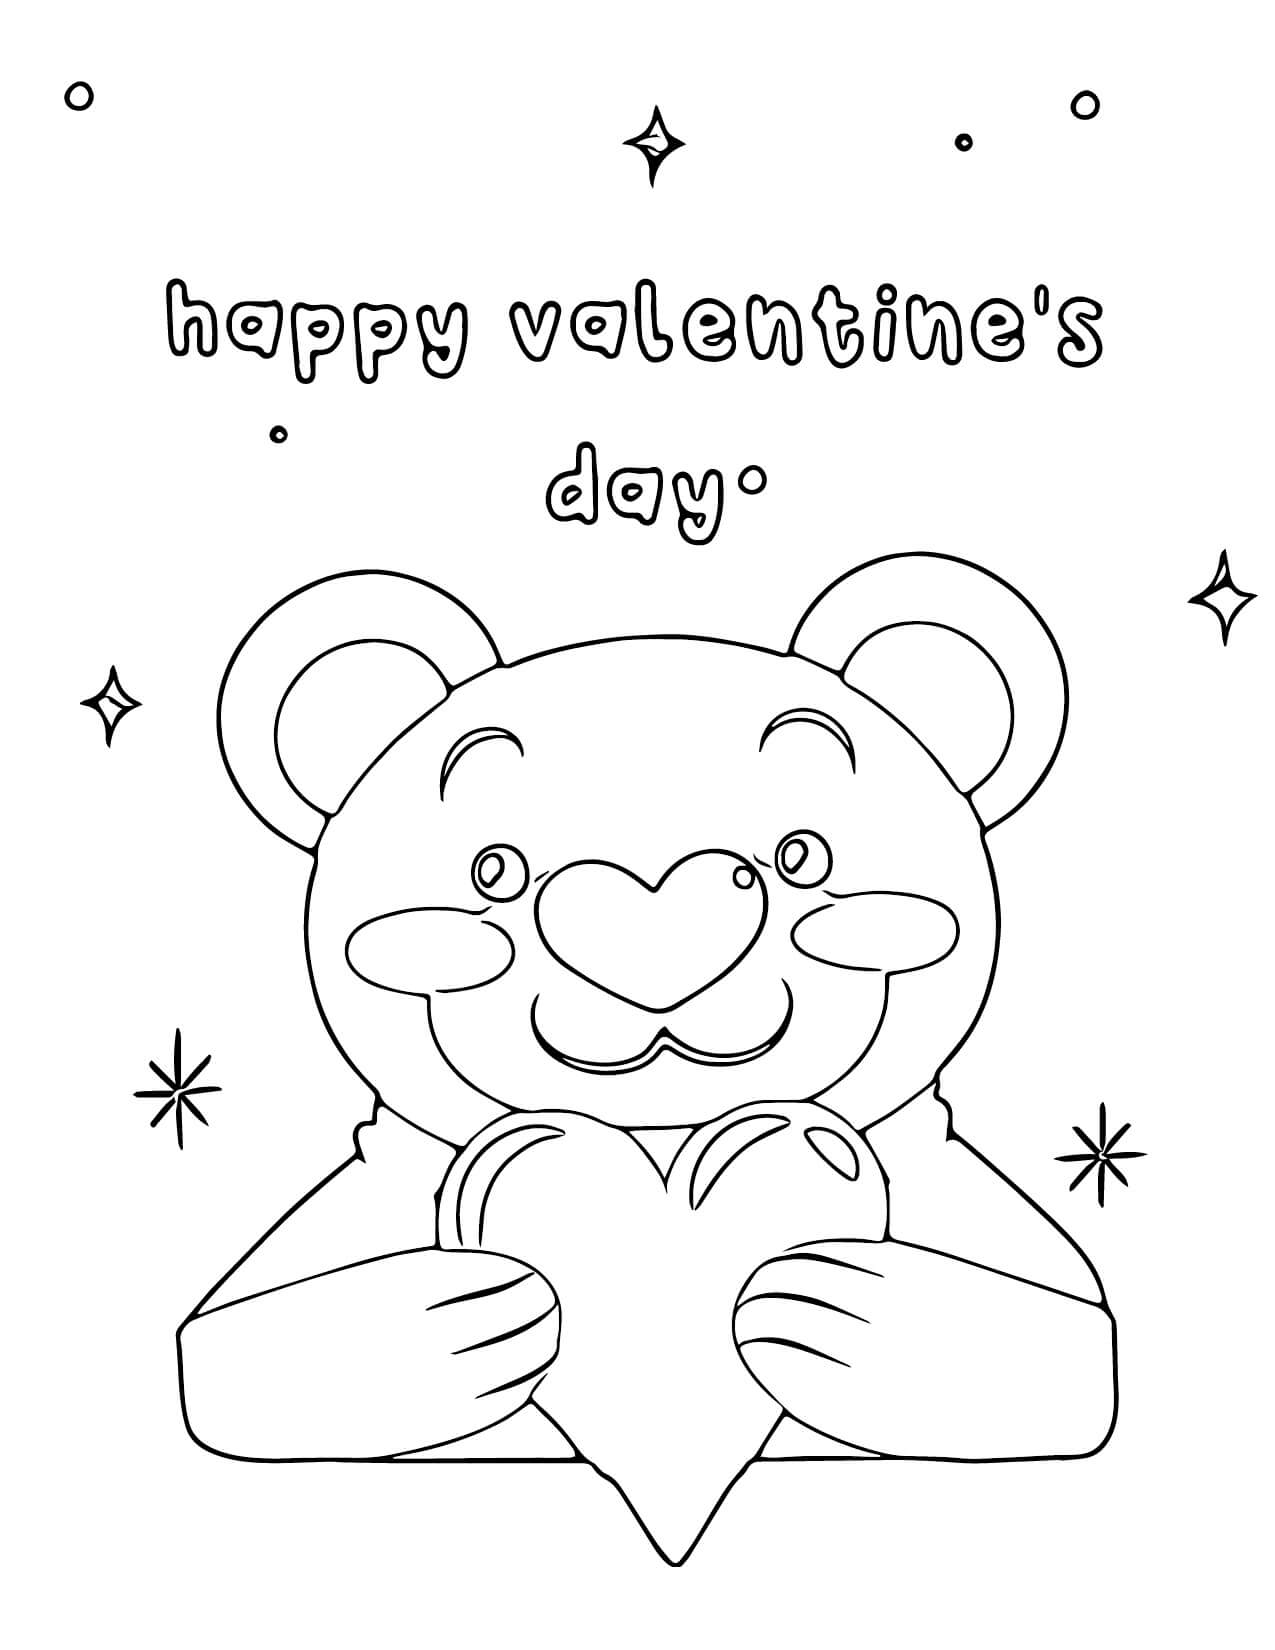 Cute Teddy Bear with Heart in Happy Valentine's Day